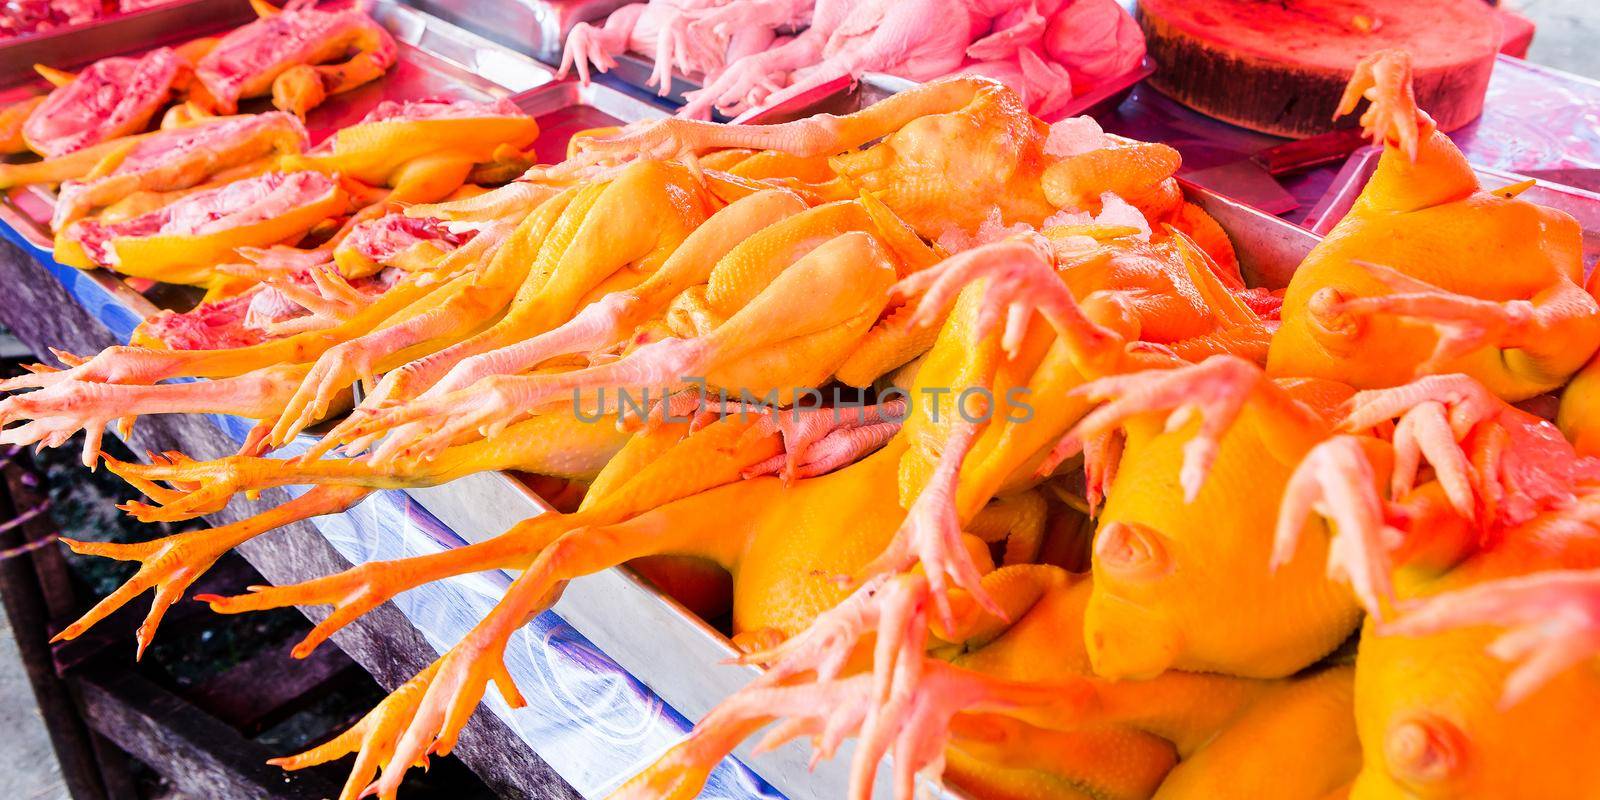 Chicken sold in the market by titipong